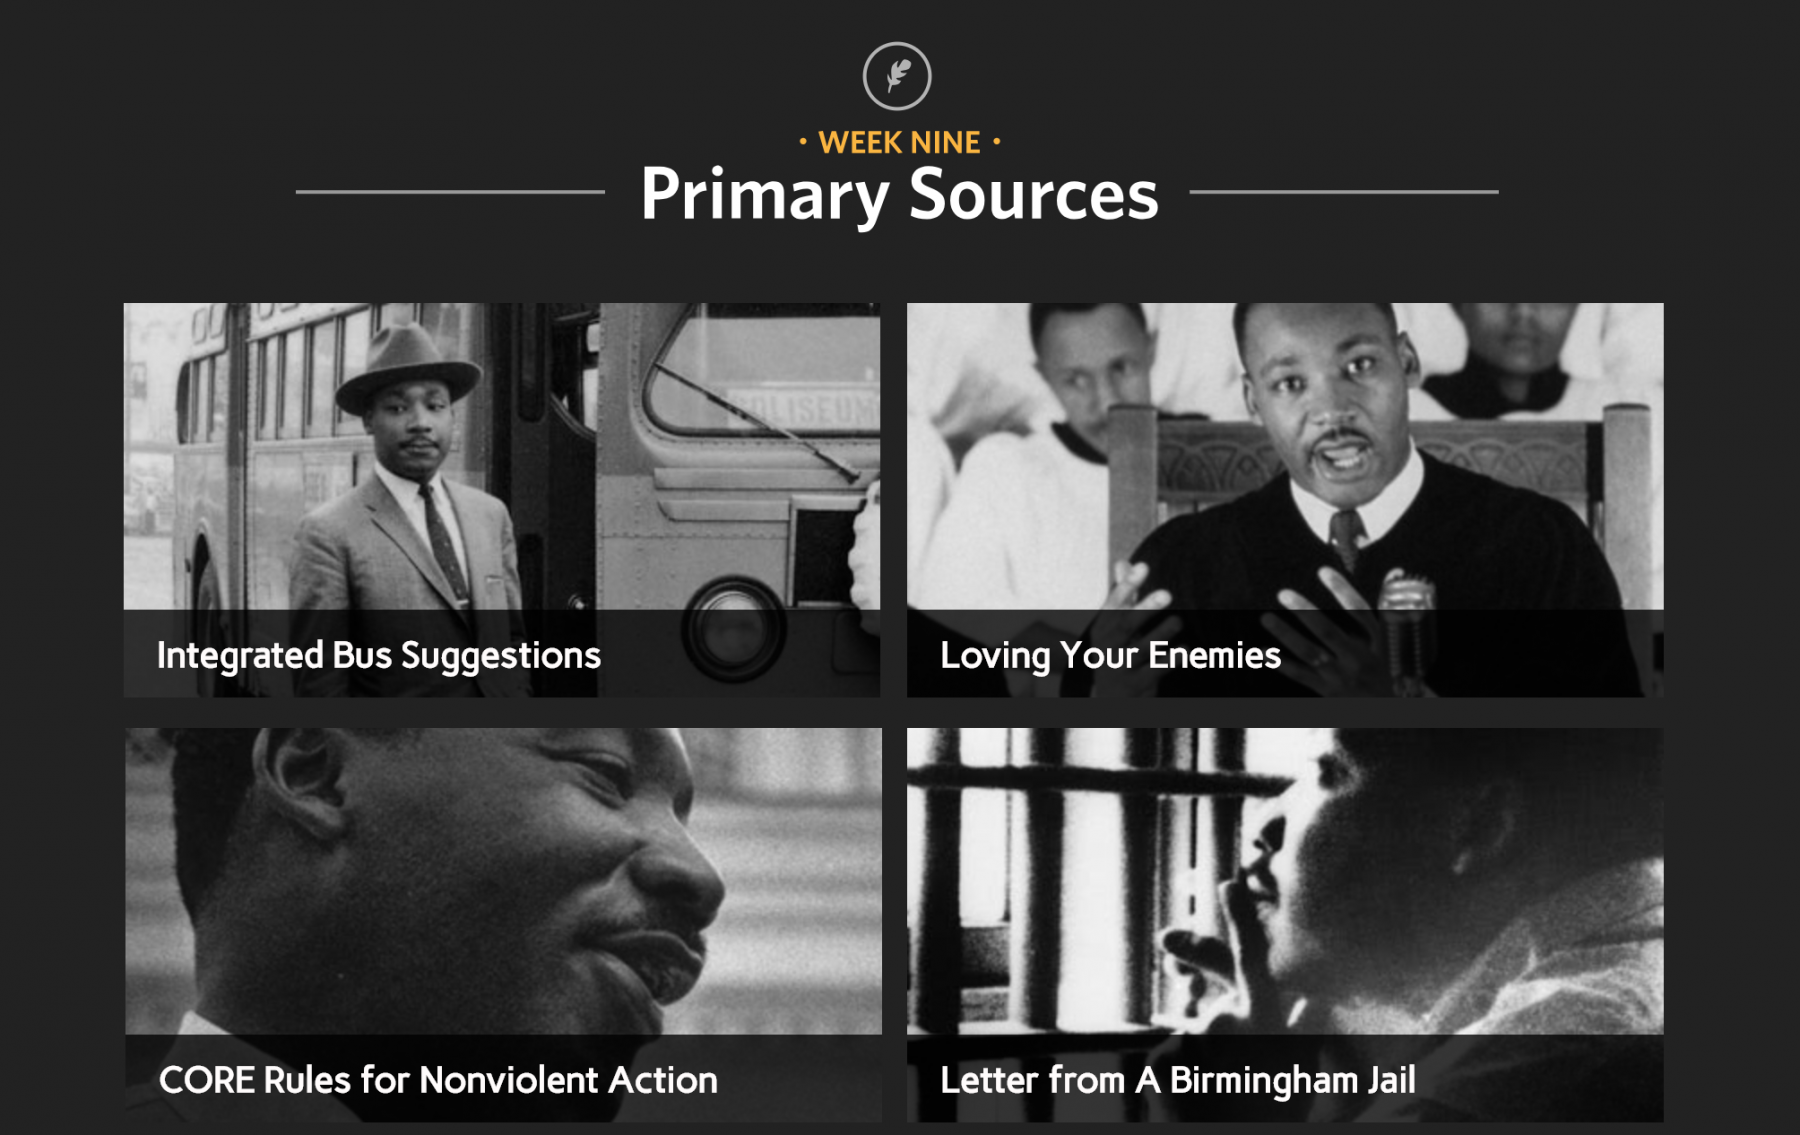 screenshot from interactive piece: 4 images and subtitles: week 9 Primary Sources; integrated bus suggestions; loving your enemies; CORE rules for nonviolent Action; Letter from a Birmingham Jail